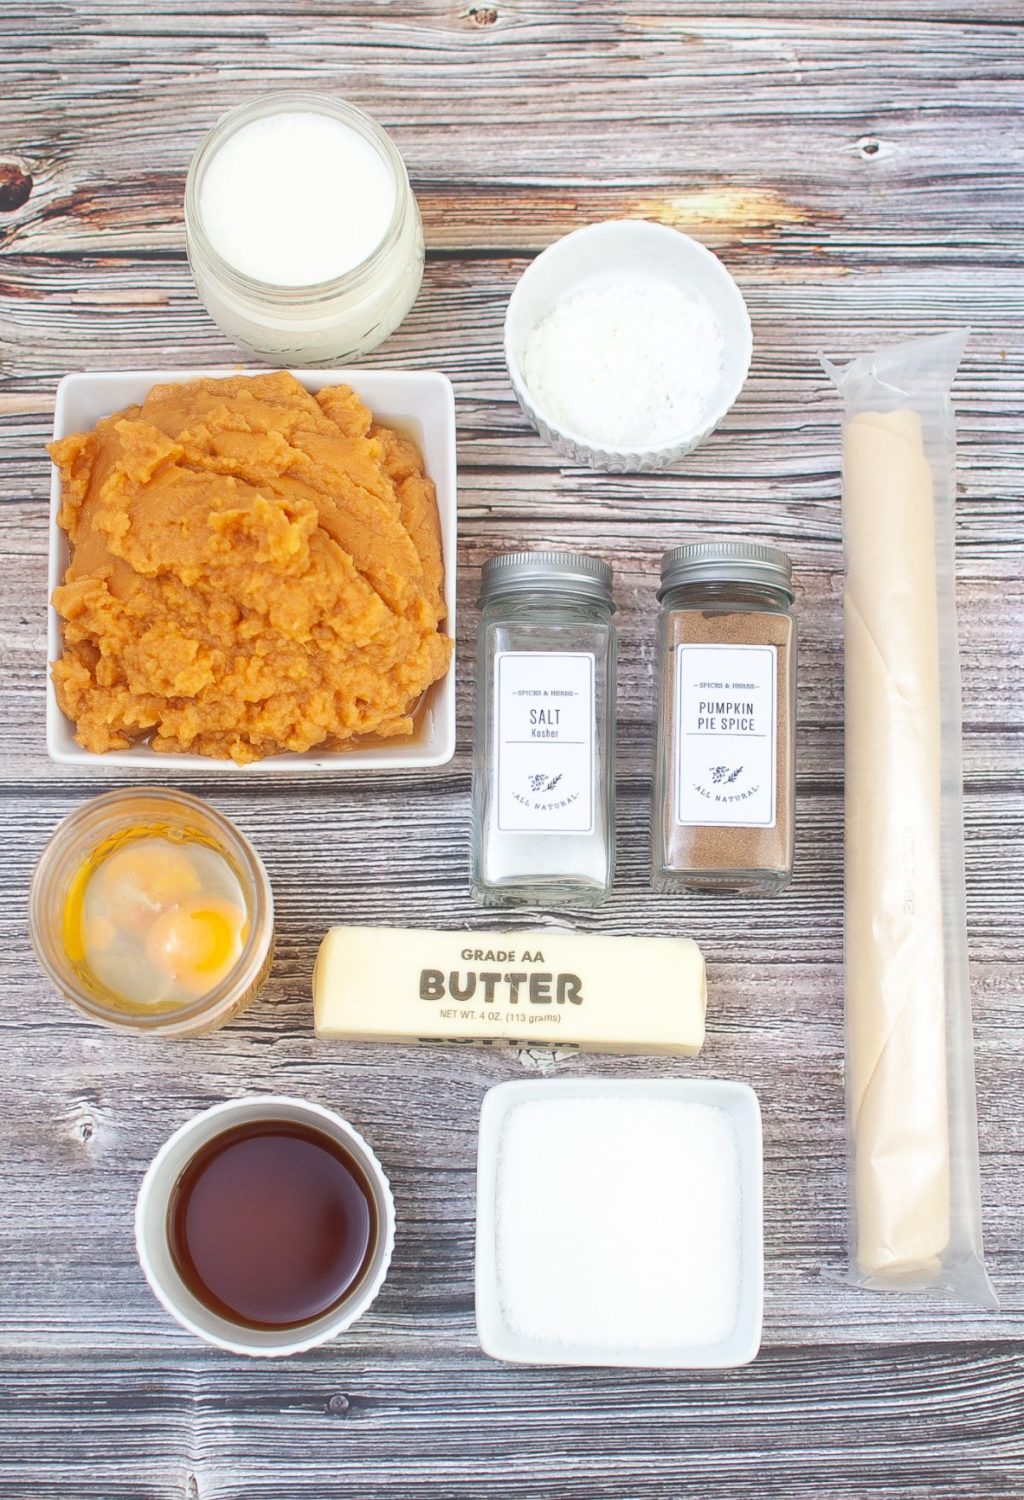 The ingredients for a pumpkin pie are laid out on a wooden table.